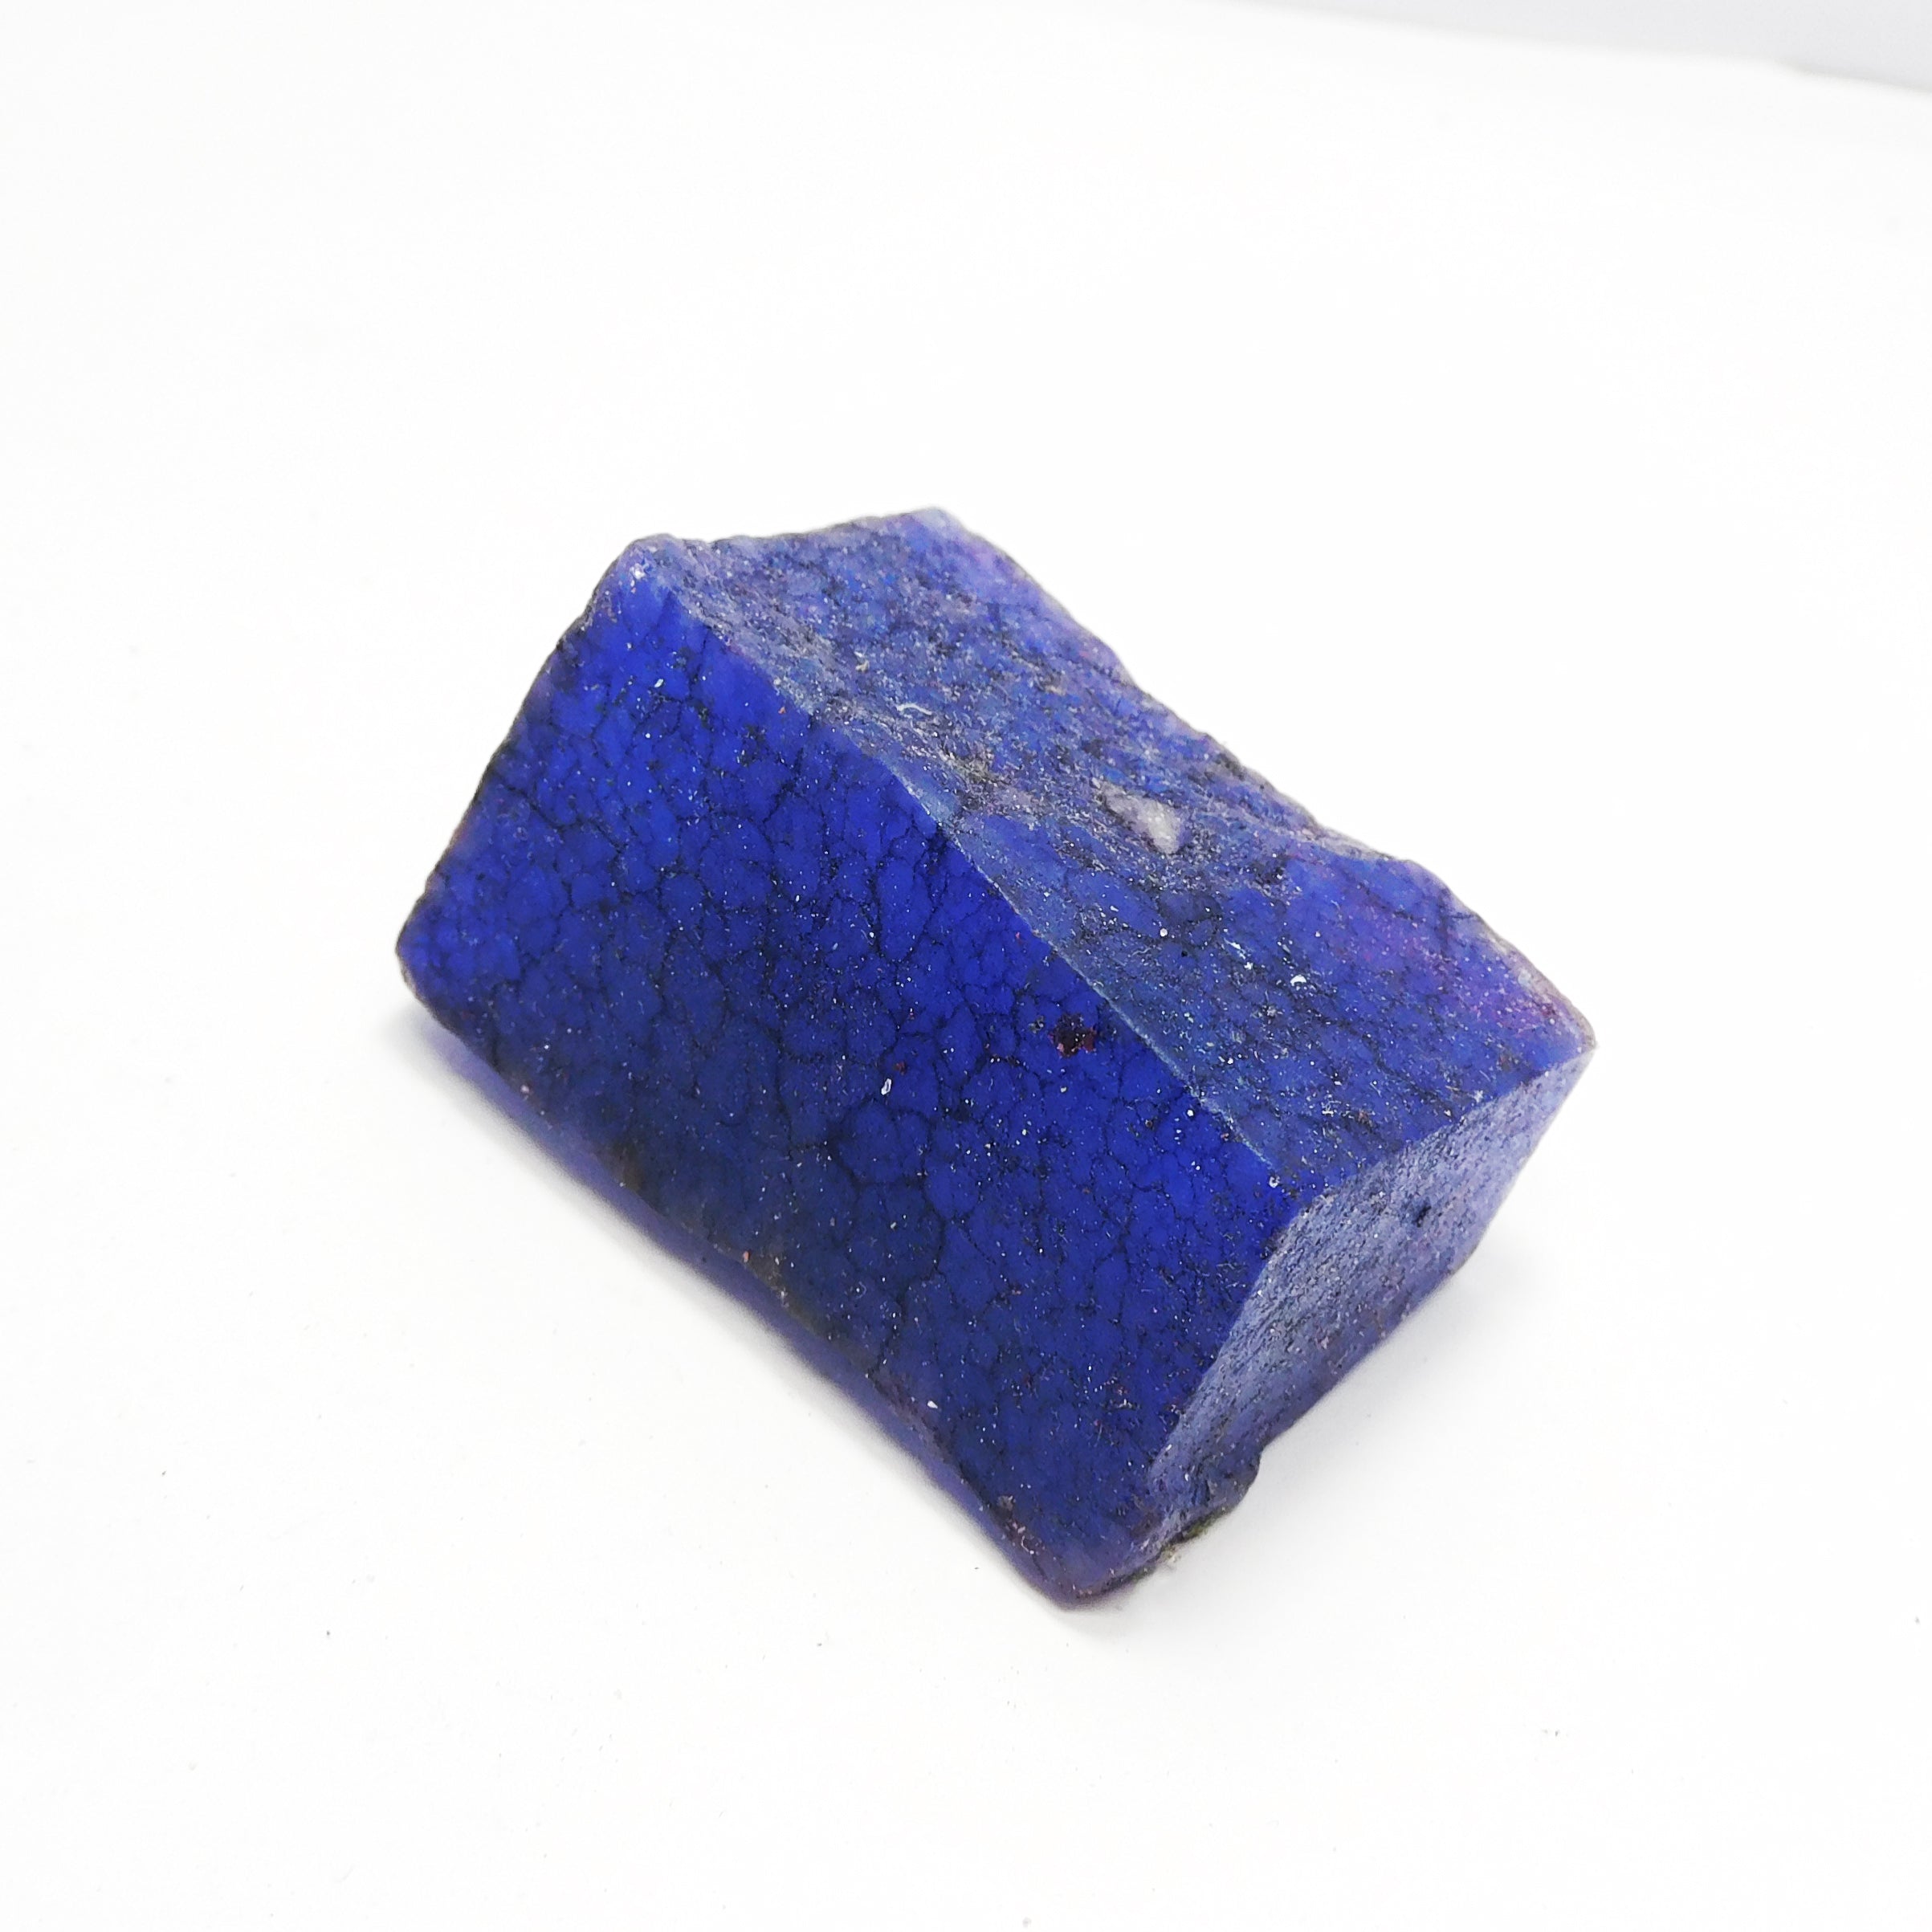 SAPPHIRE- Protection from Negative Energies !! 274.85 Carat Natural Blue Sapphire Uncut Raw Rough Loose Gemstone CERTIFIED